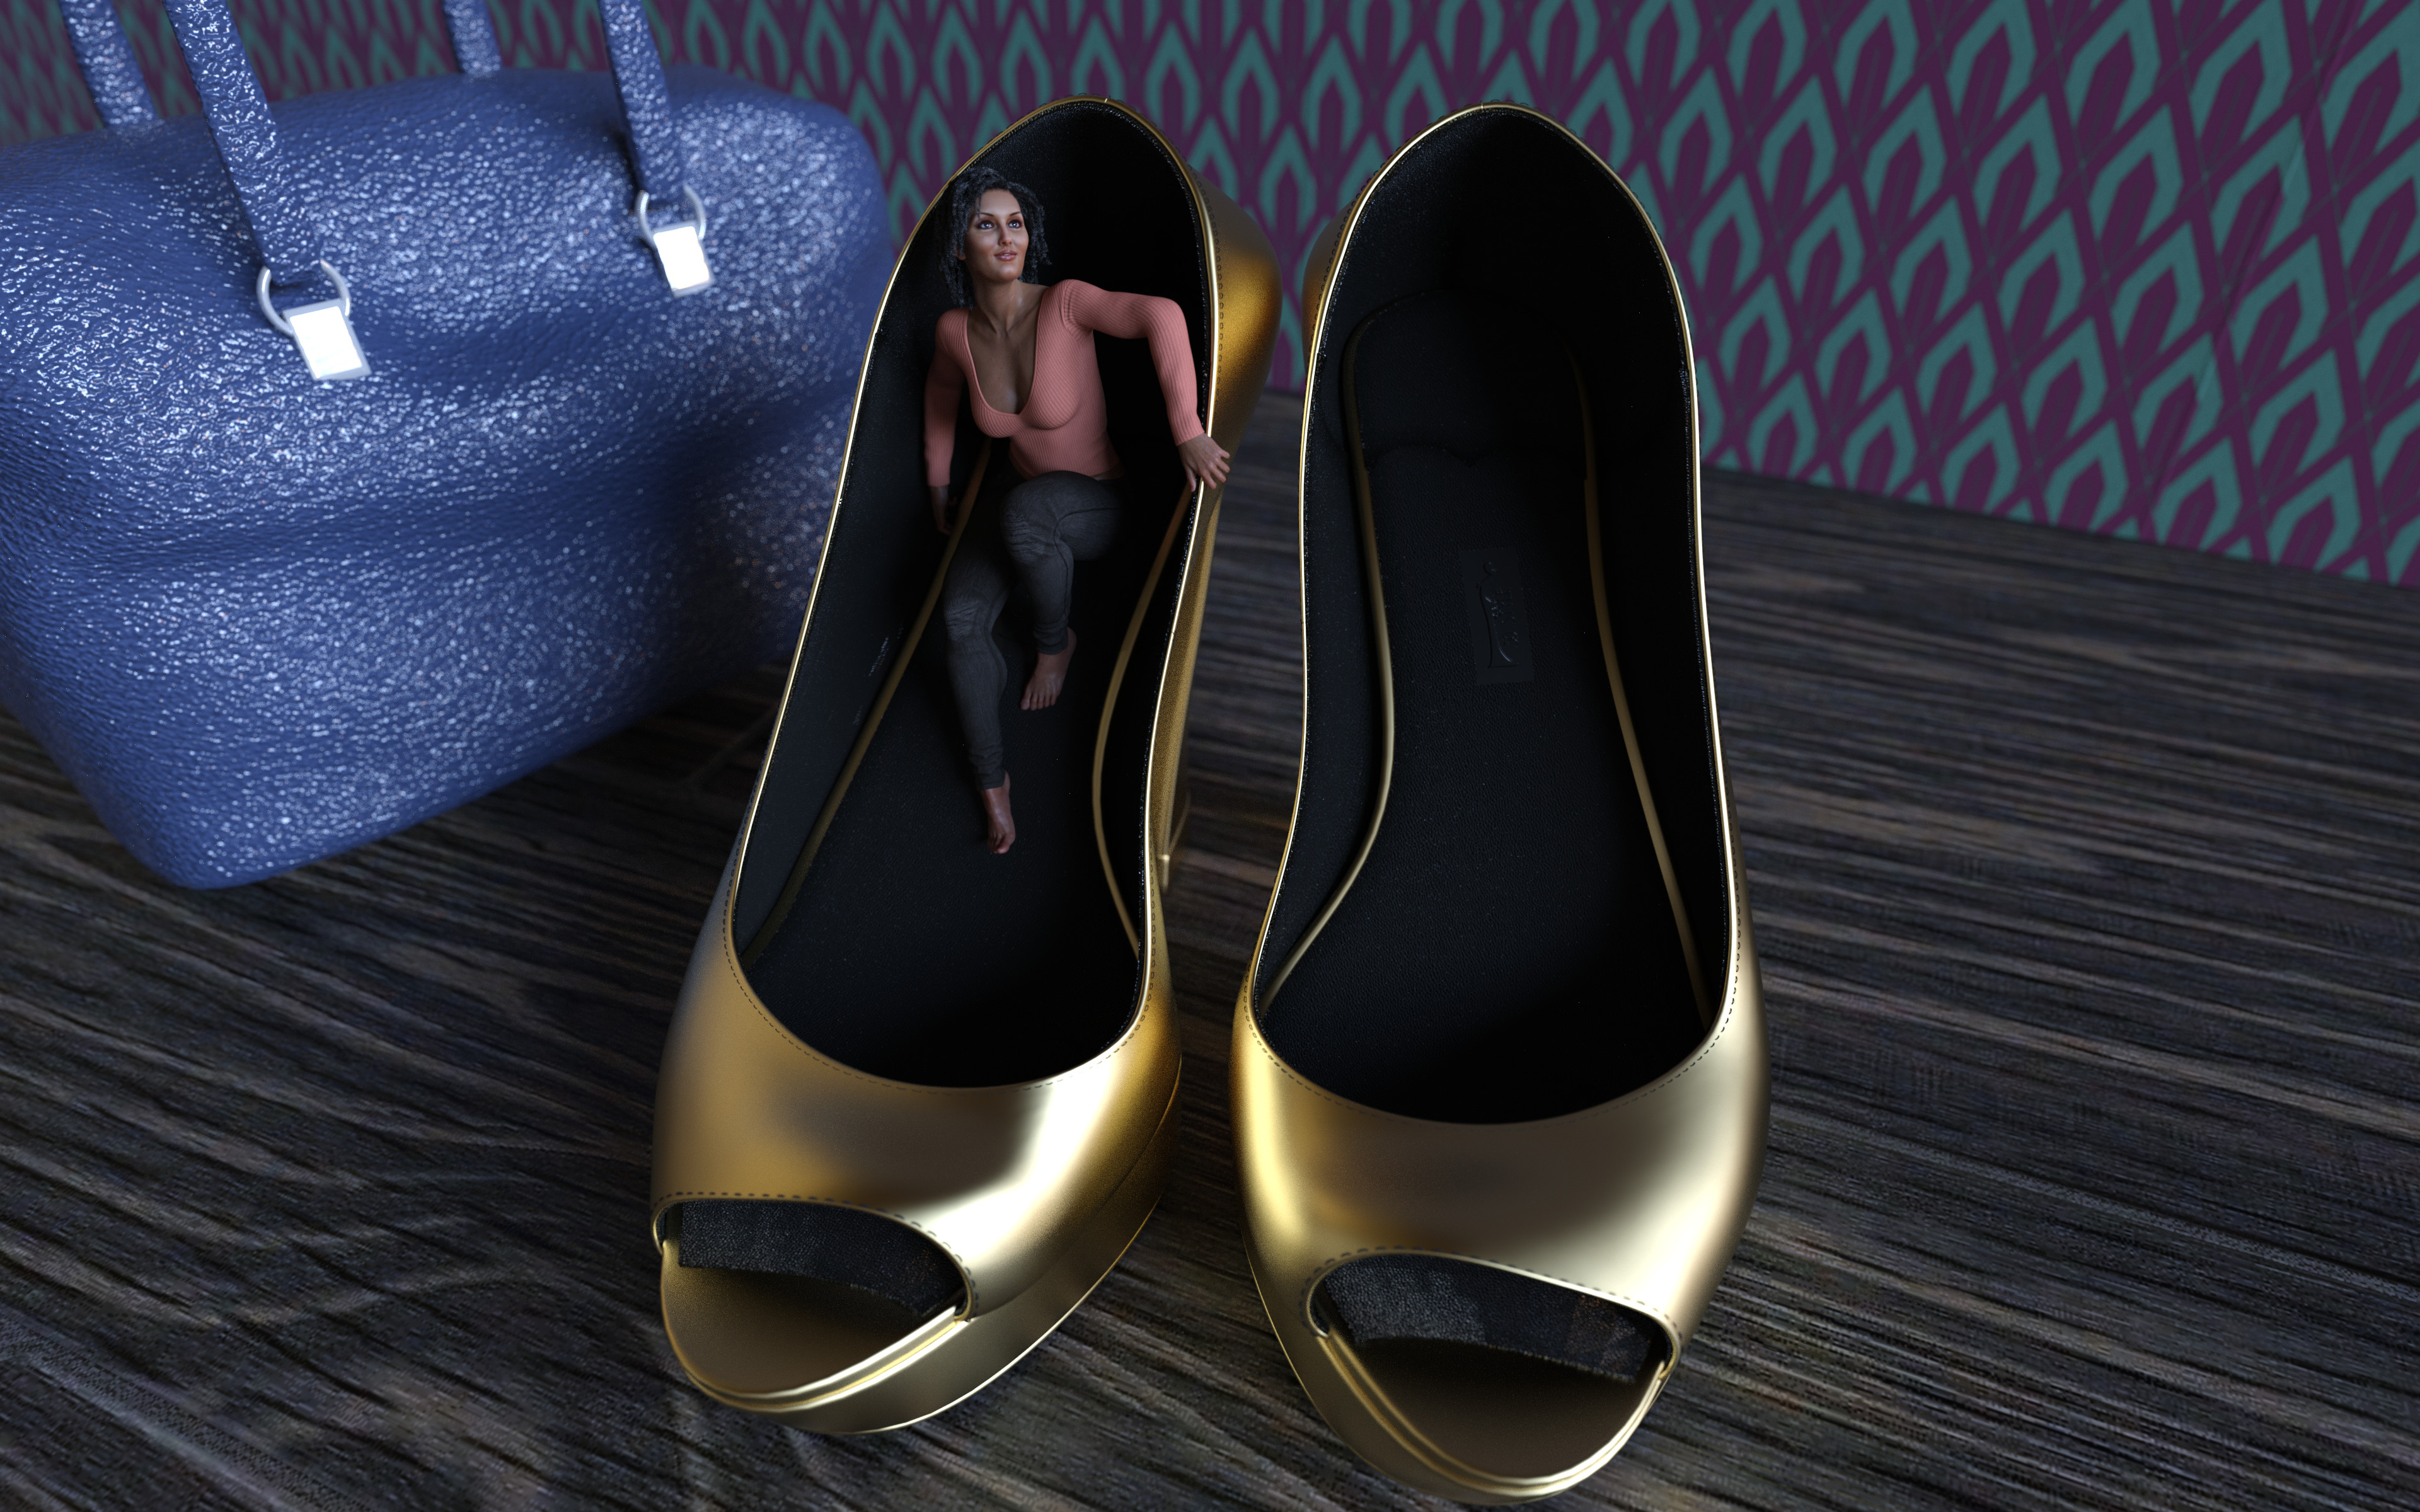 Norma wanted very special shoes, now she has more than that.jpg